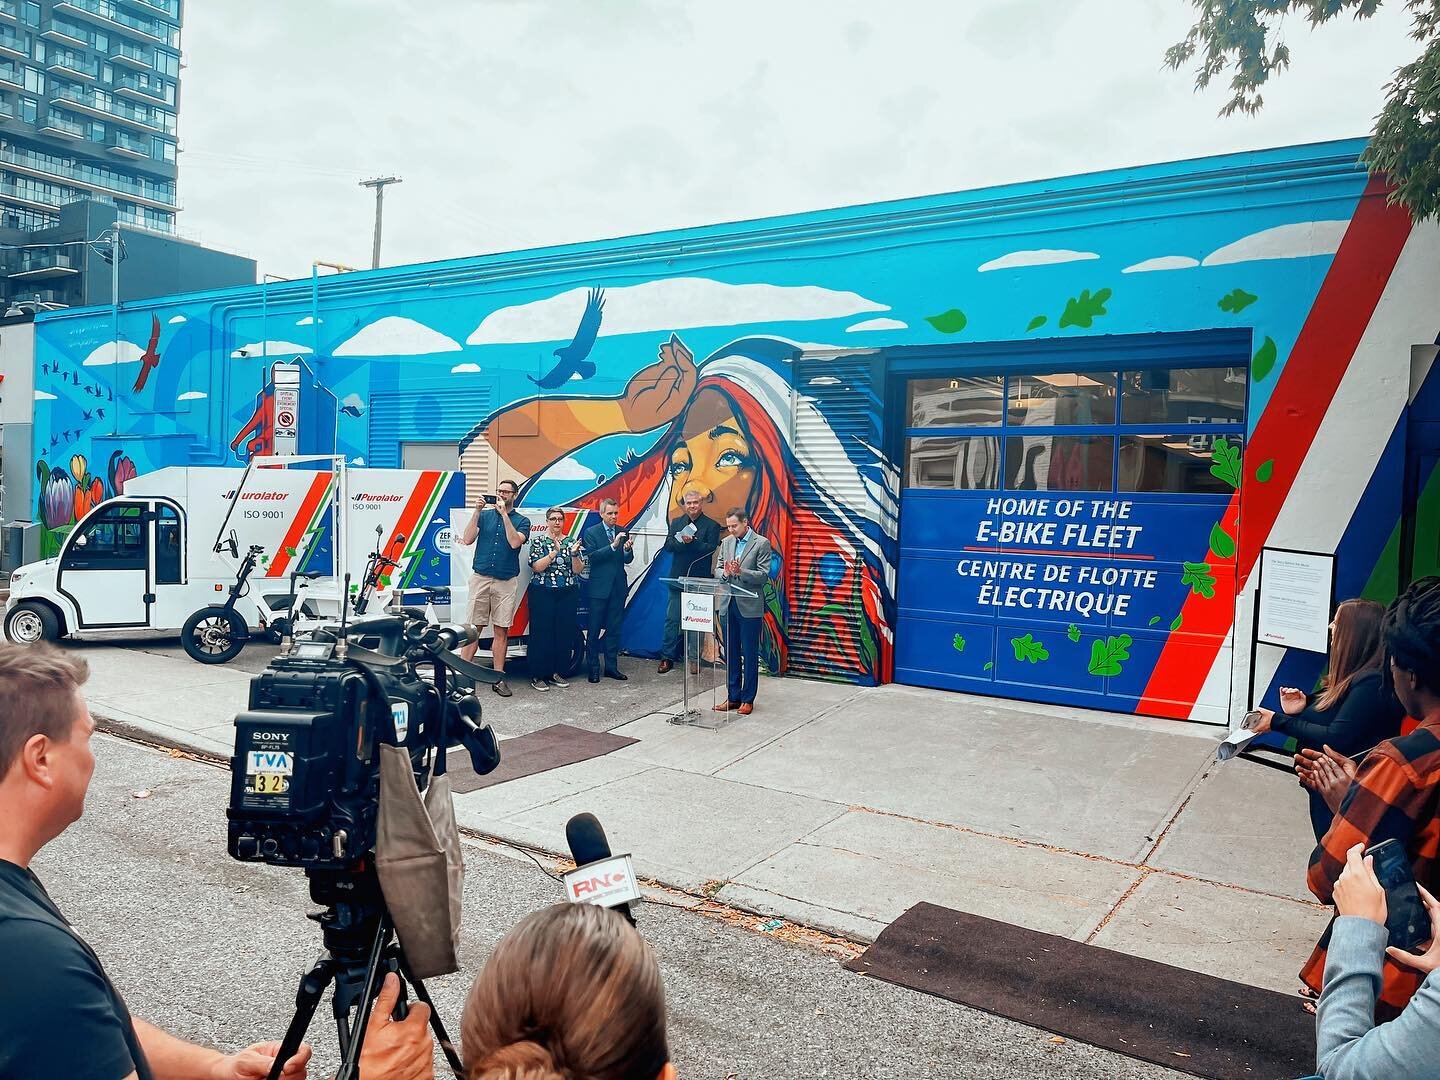 Yesterday we opened the new Purolator Retail &amp; Urban Distribution Centre - Home of the E-Bike fleet.
The stunning mural was done by Peatr Thomas, an Indigenous artist from Manitoba, and local artist Jimmy Baptiste.
Mayor Sutcliffe was onsite with